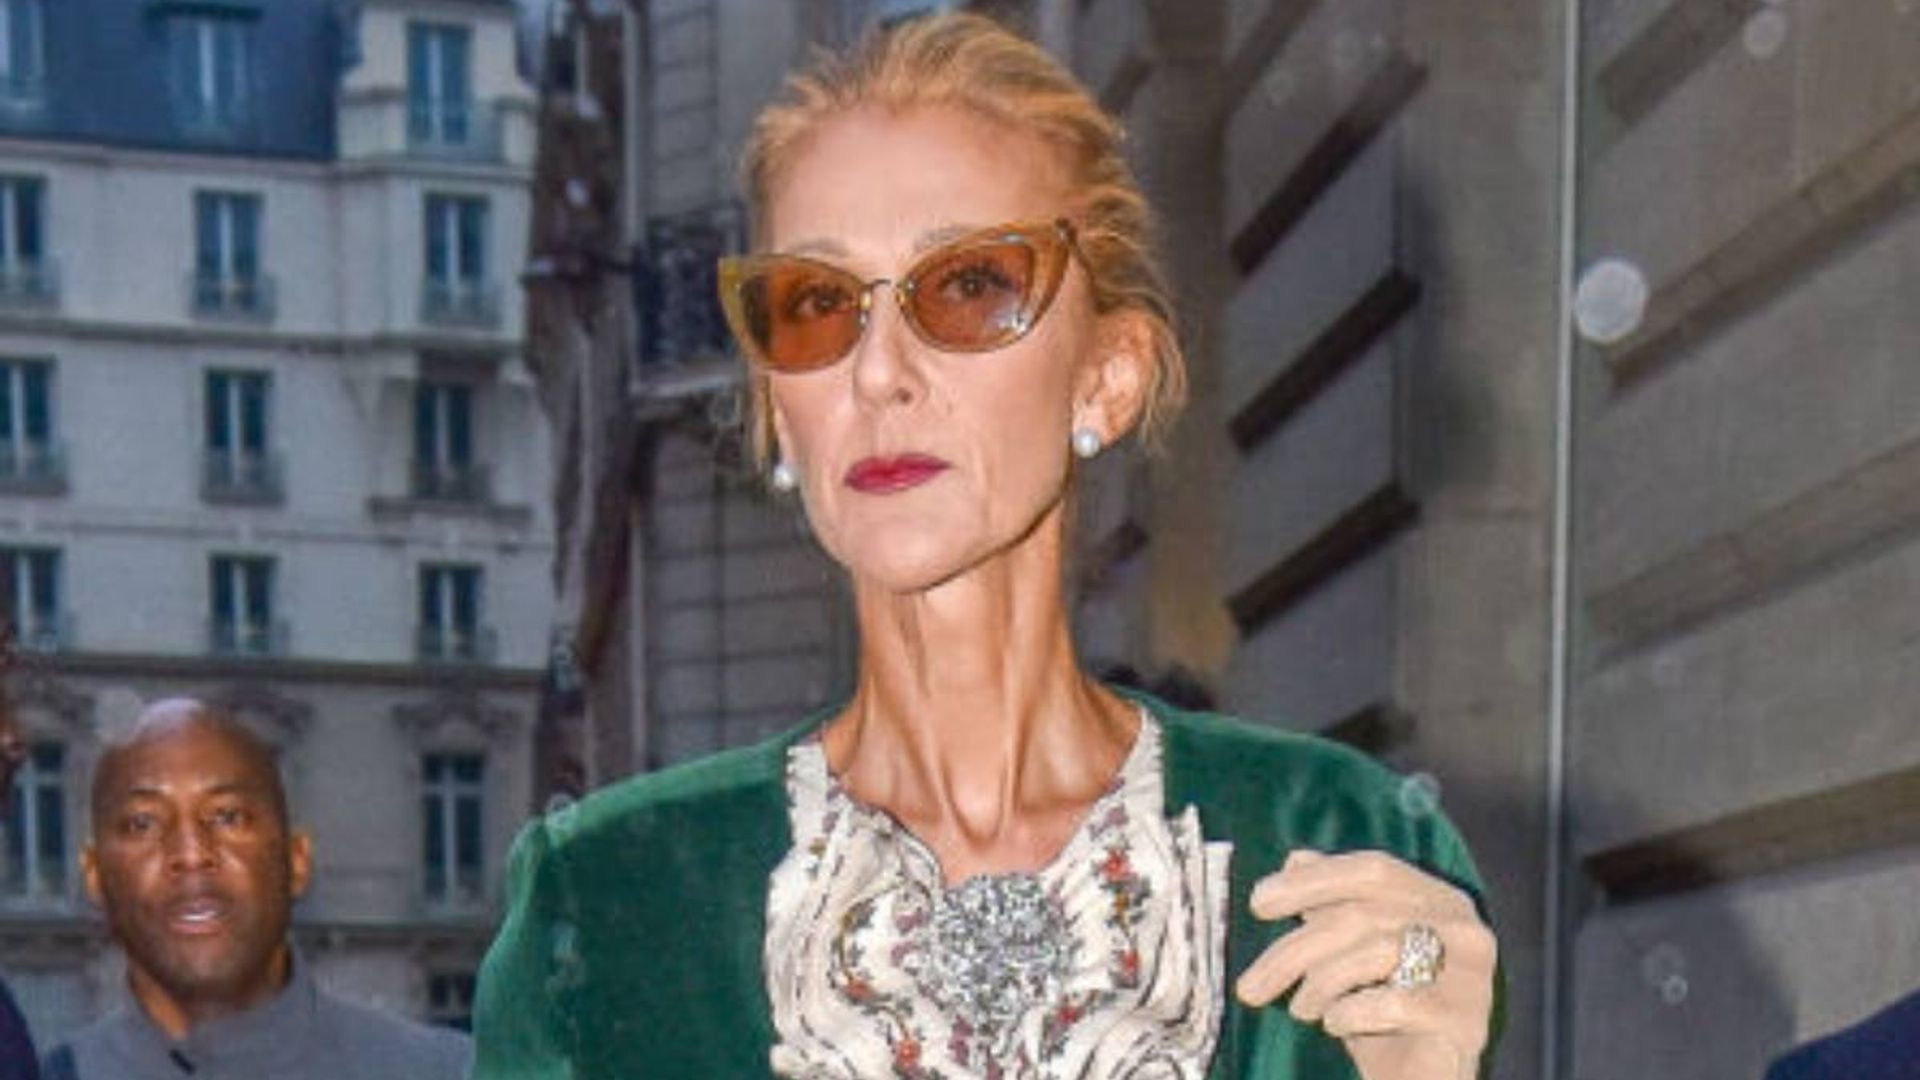 Celine Dion inundated with prayers after agonizing health diagnosis and